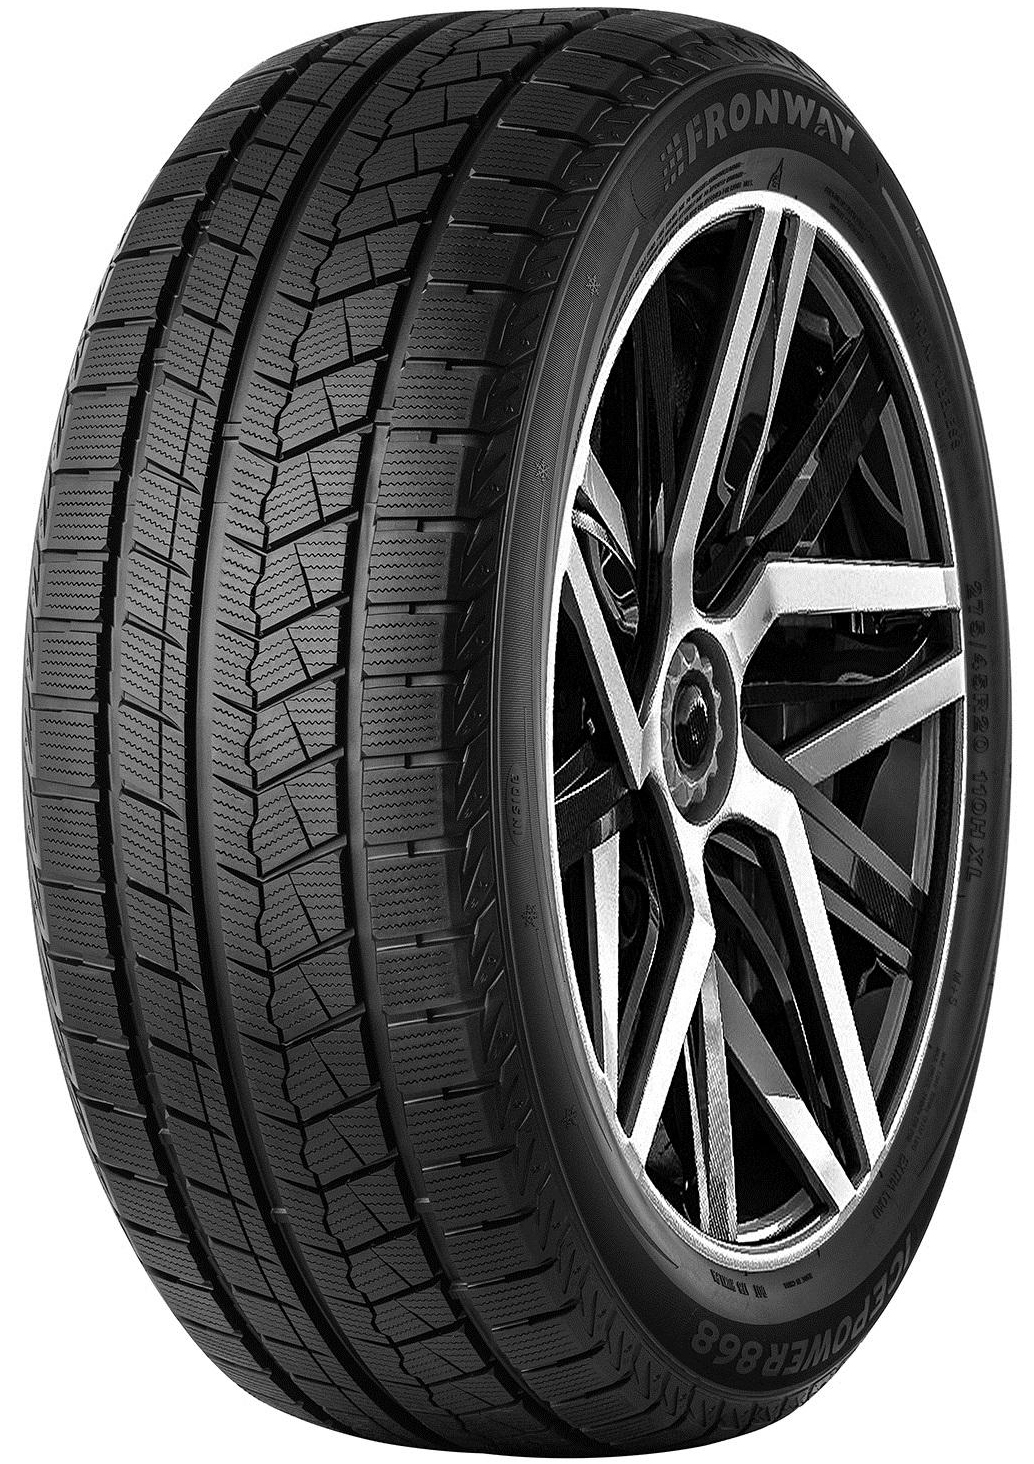    Fronway Icepower 868 315/35 R20 